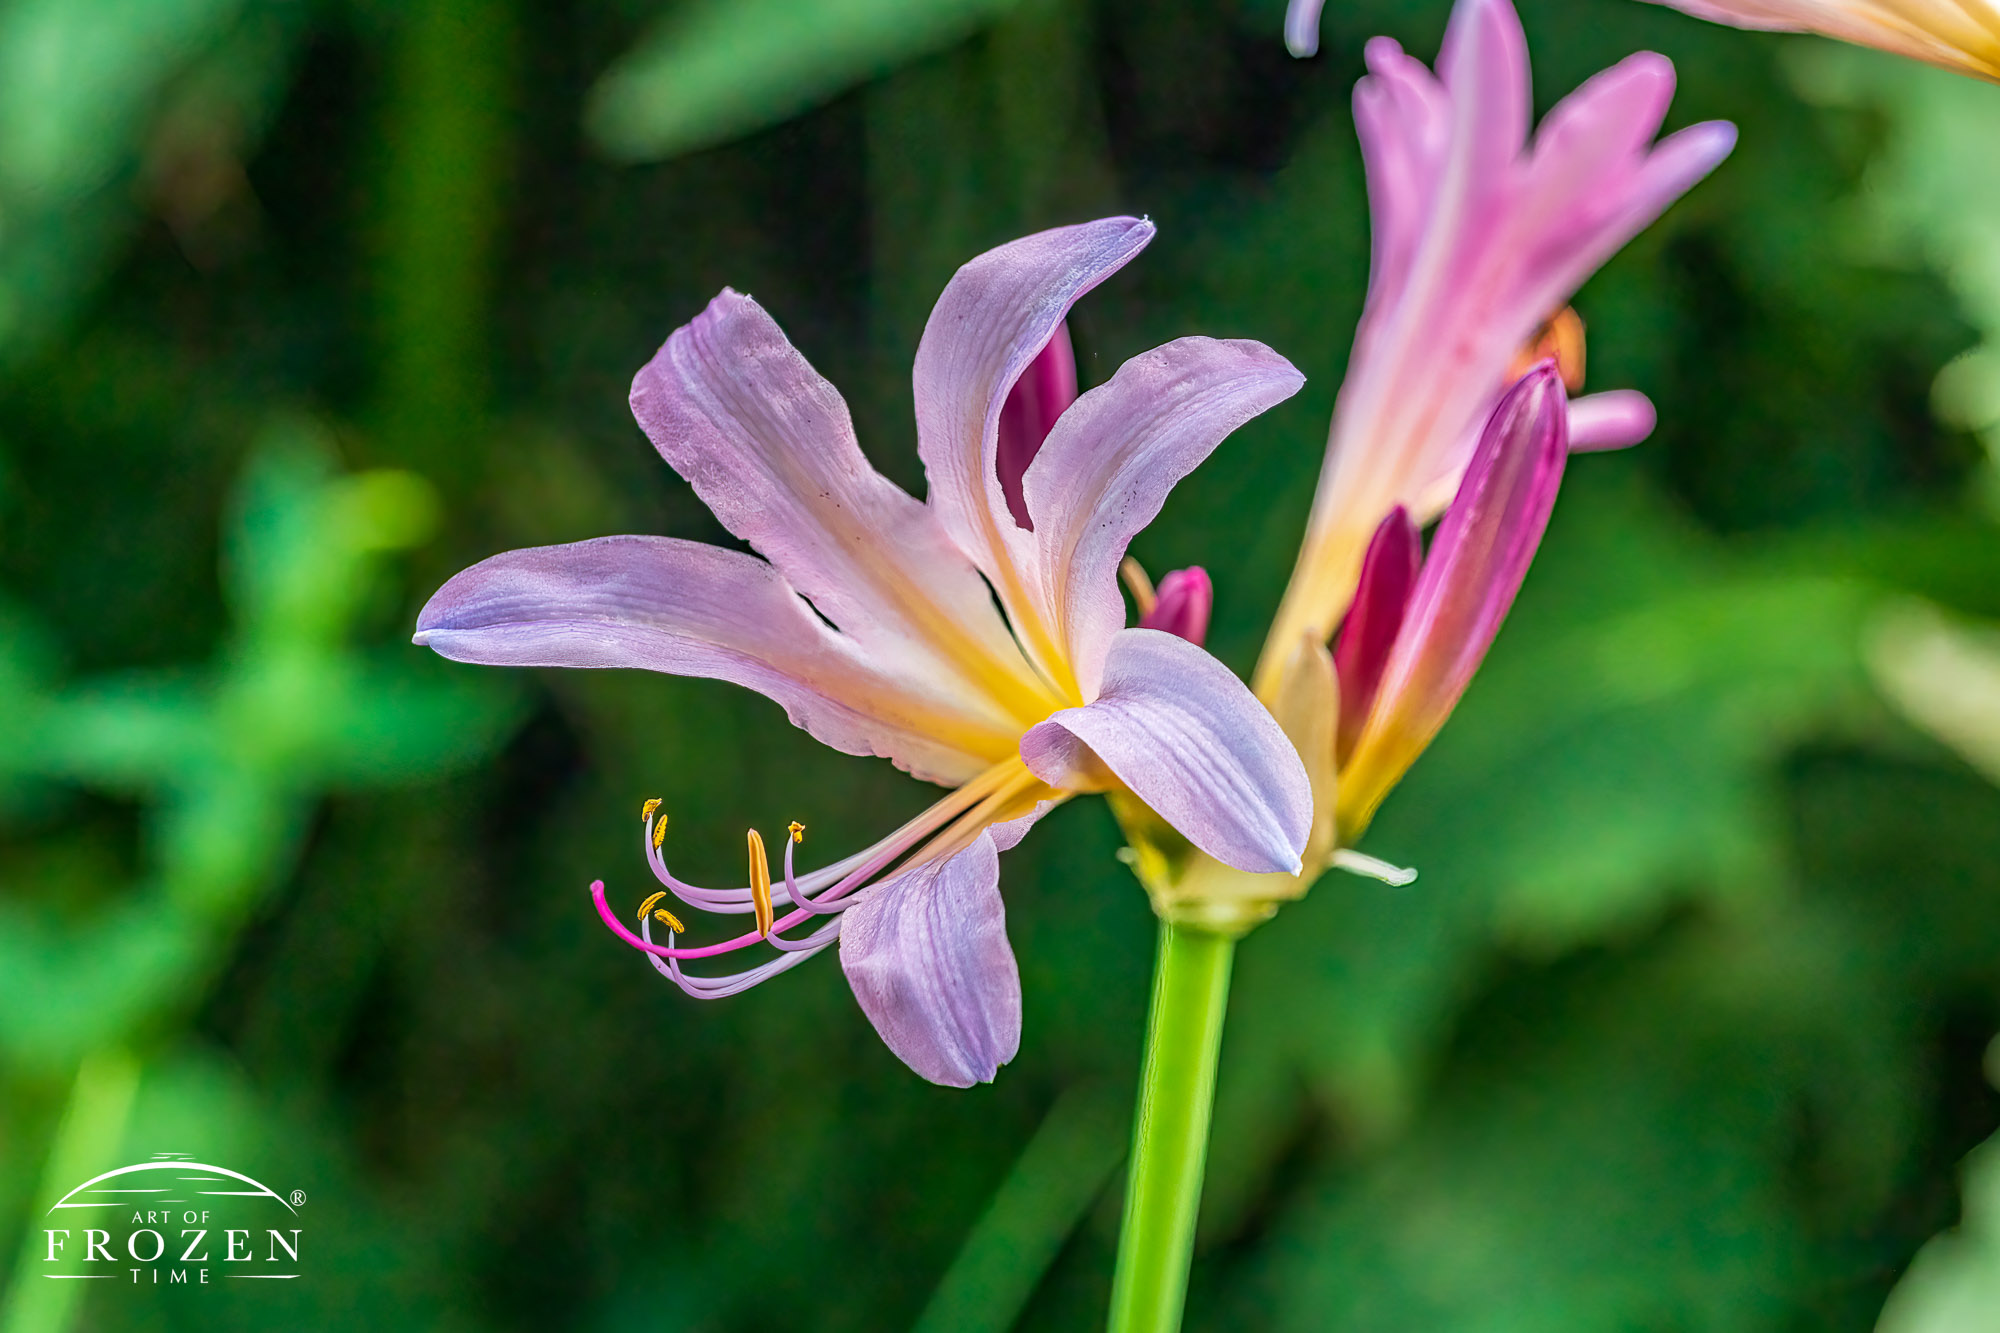 Intimate view of a Surprise Lily featuring its pink trumpet-shaped flowers, hot pink stigma and yellow anthers.